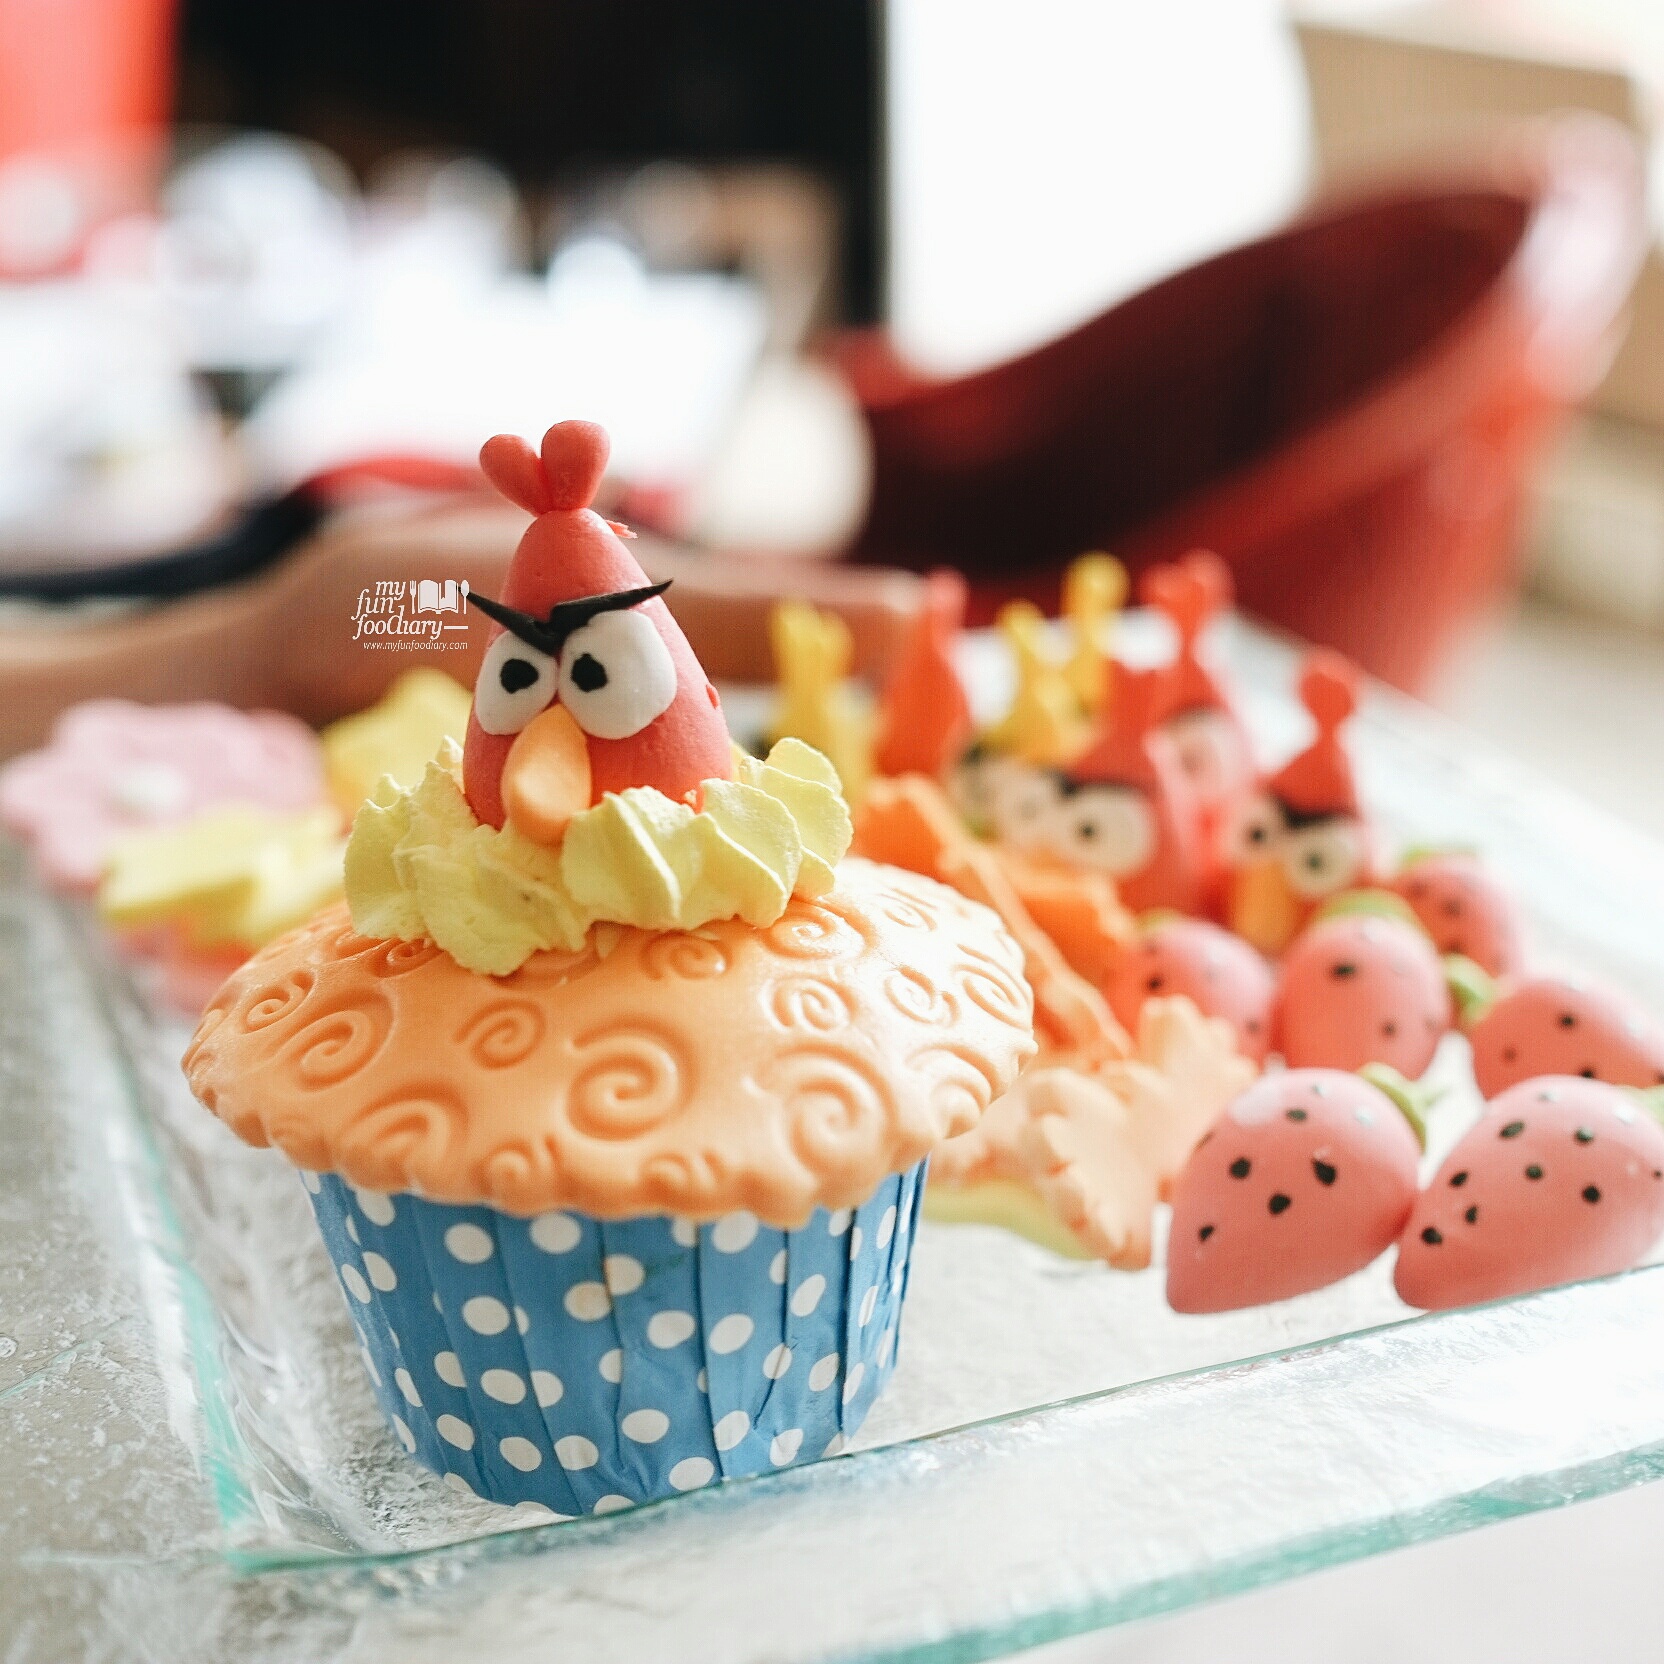 Angry Bird Cupcake at Rosso Shangrila Jakarta by Myfunfoodiary